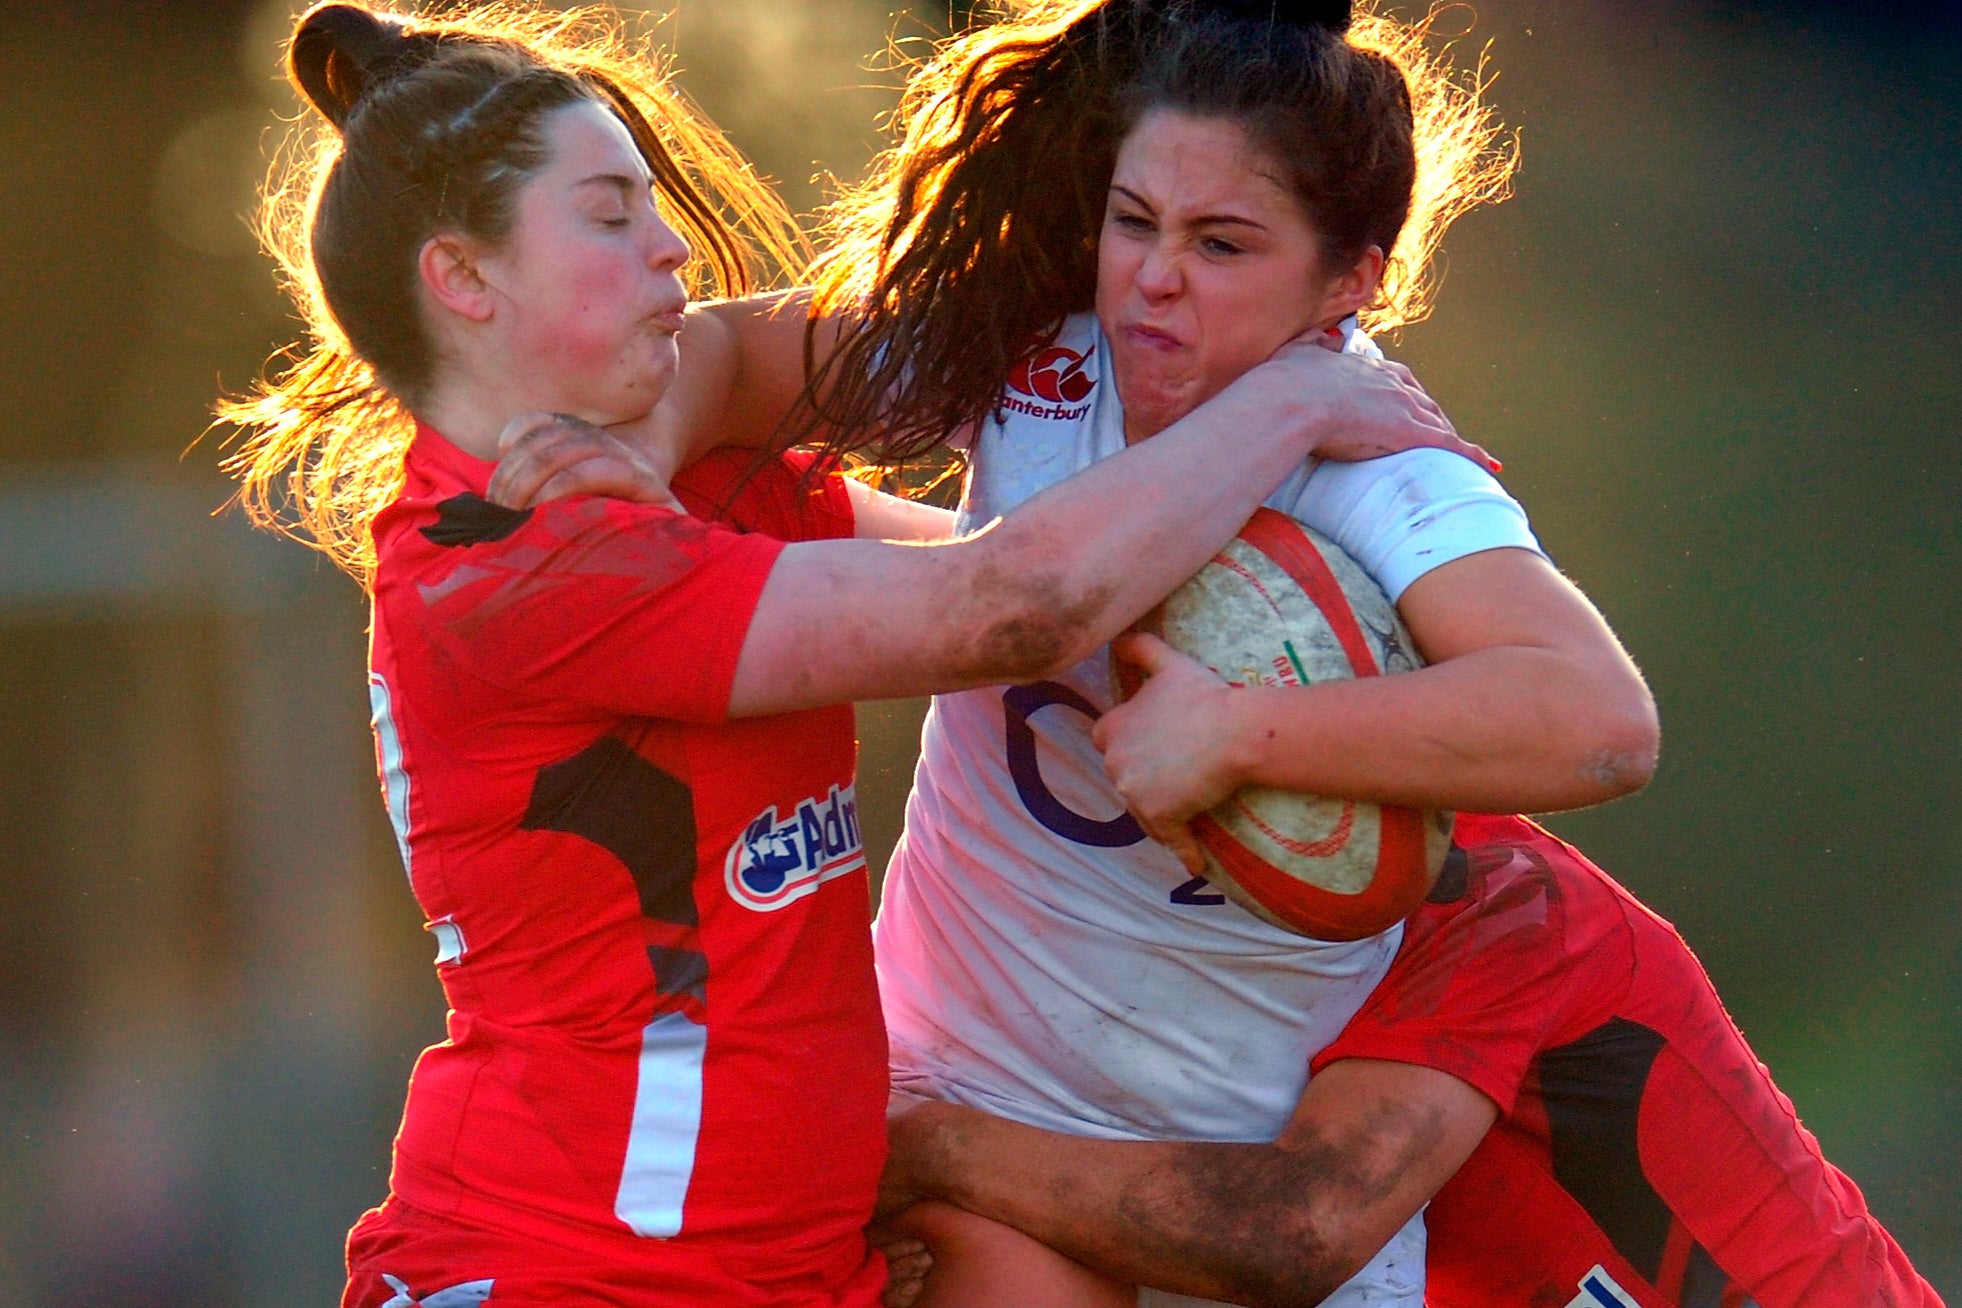 Sydney Gregson made her England debut as a teenager in 2015